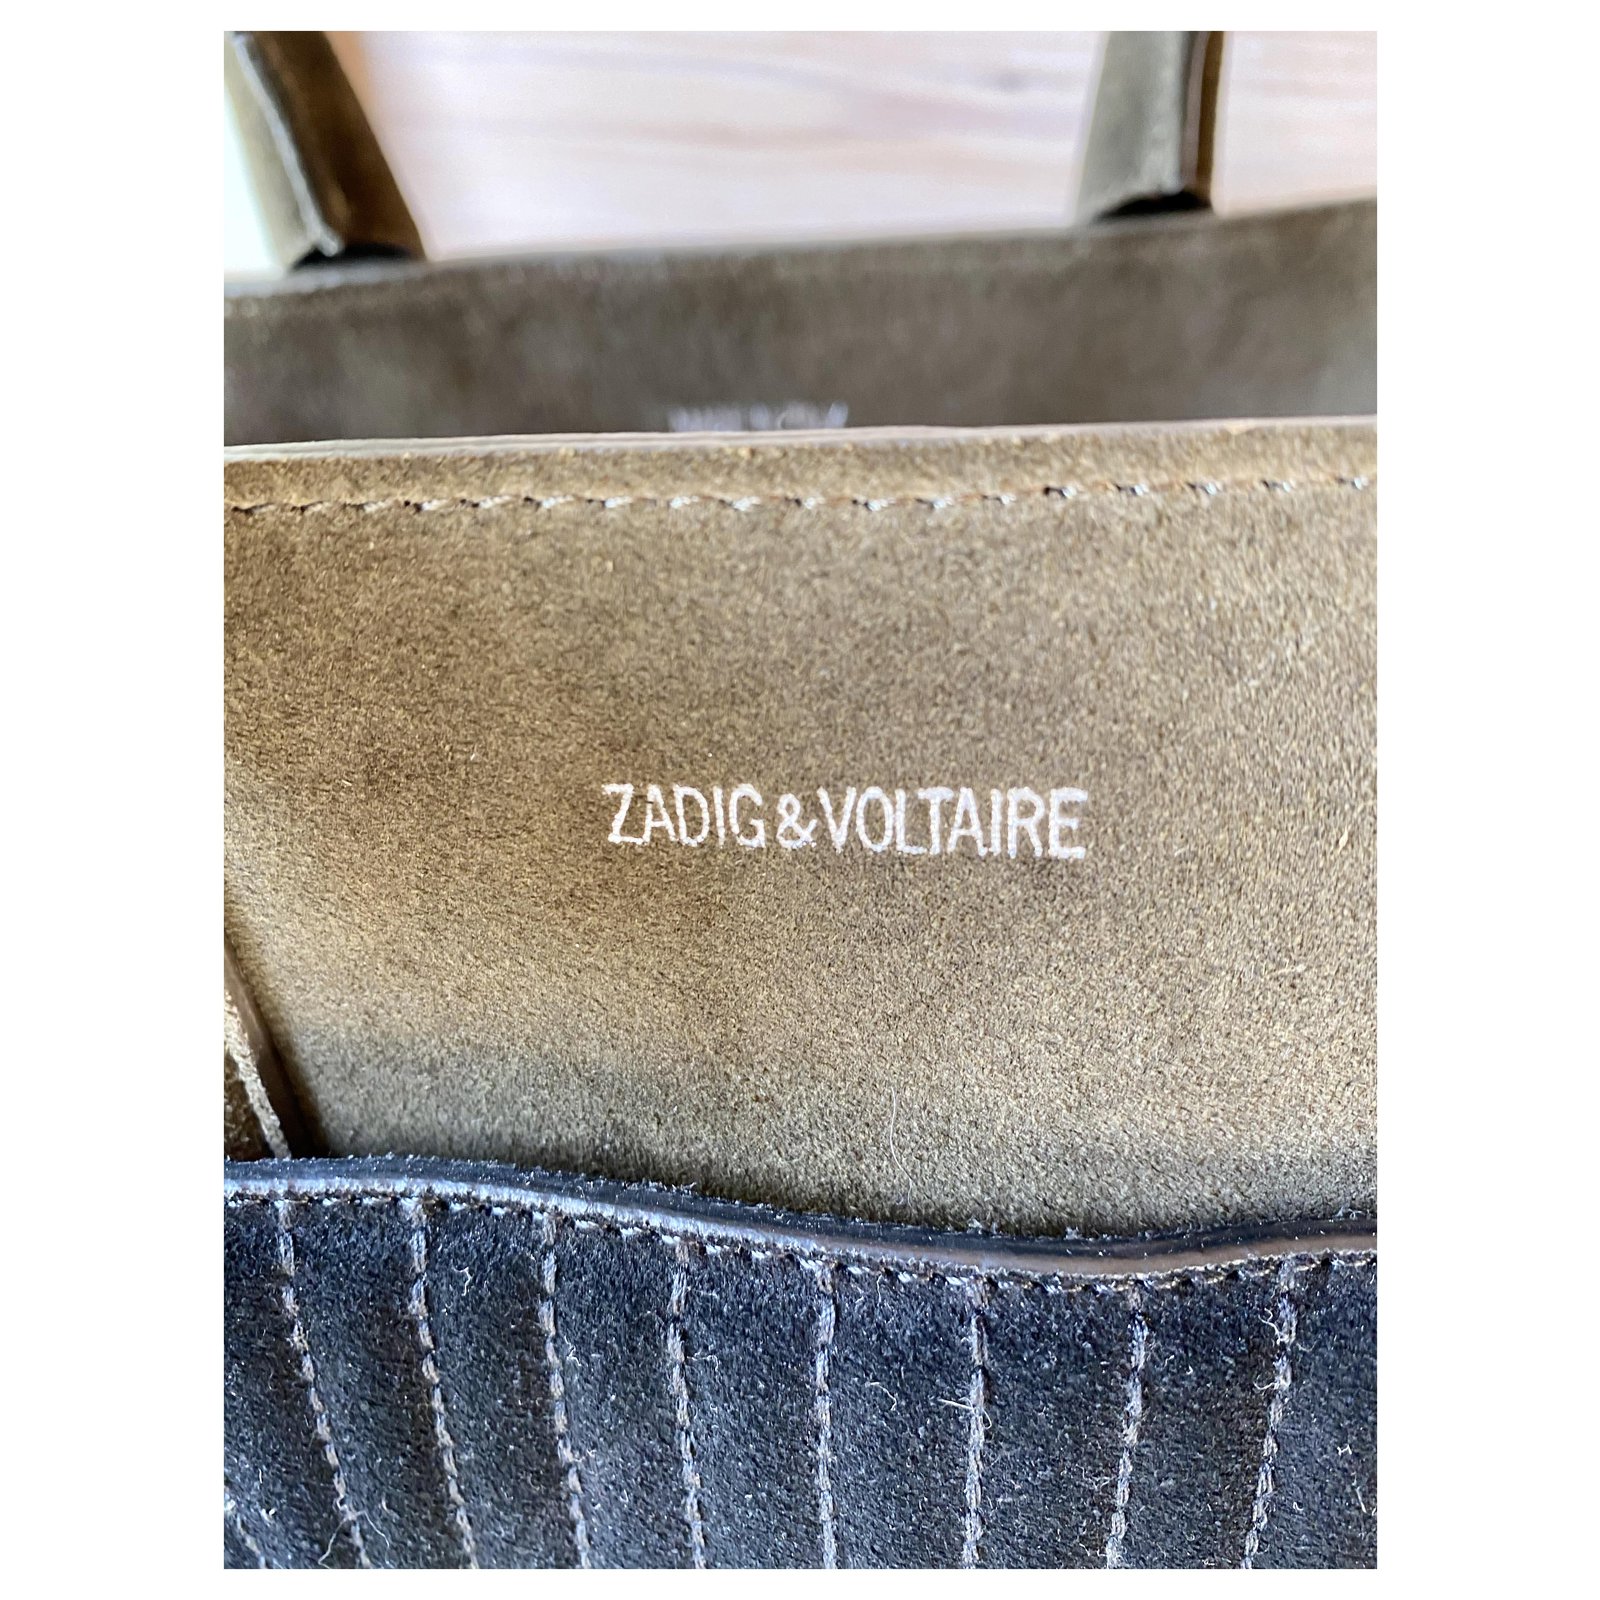 Zadig & Voltaire de Luxe small candide black and khaki suede bag